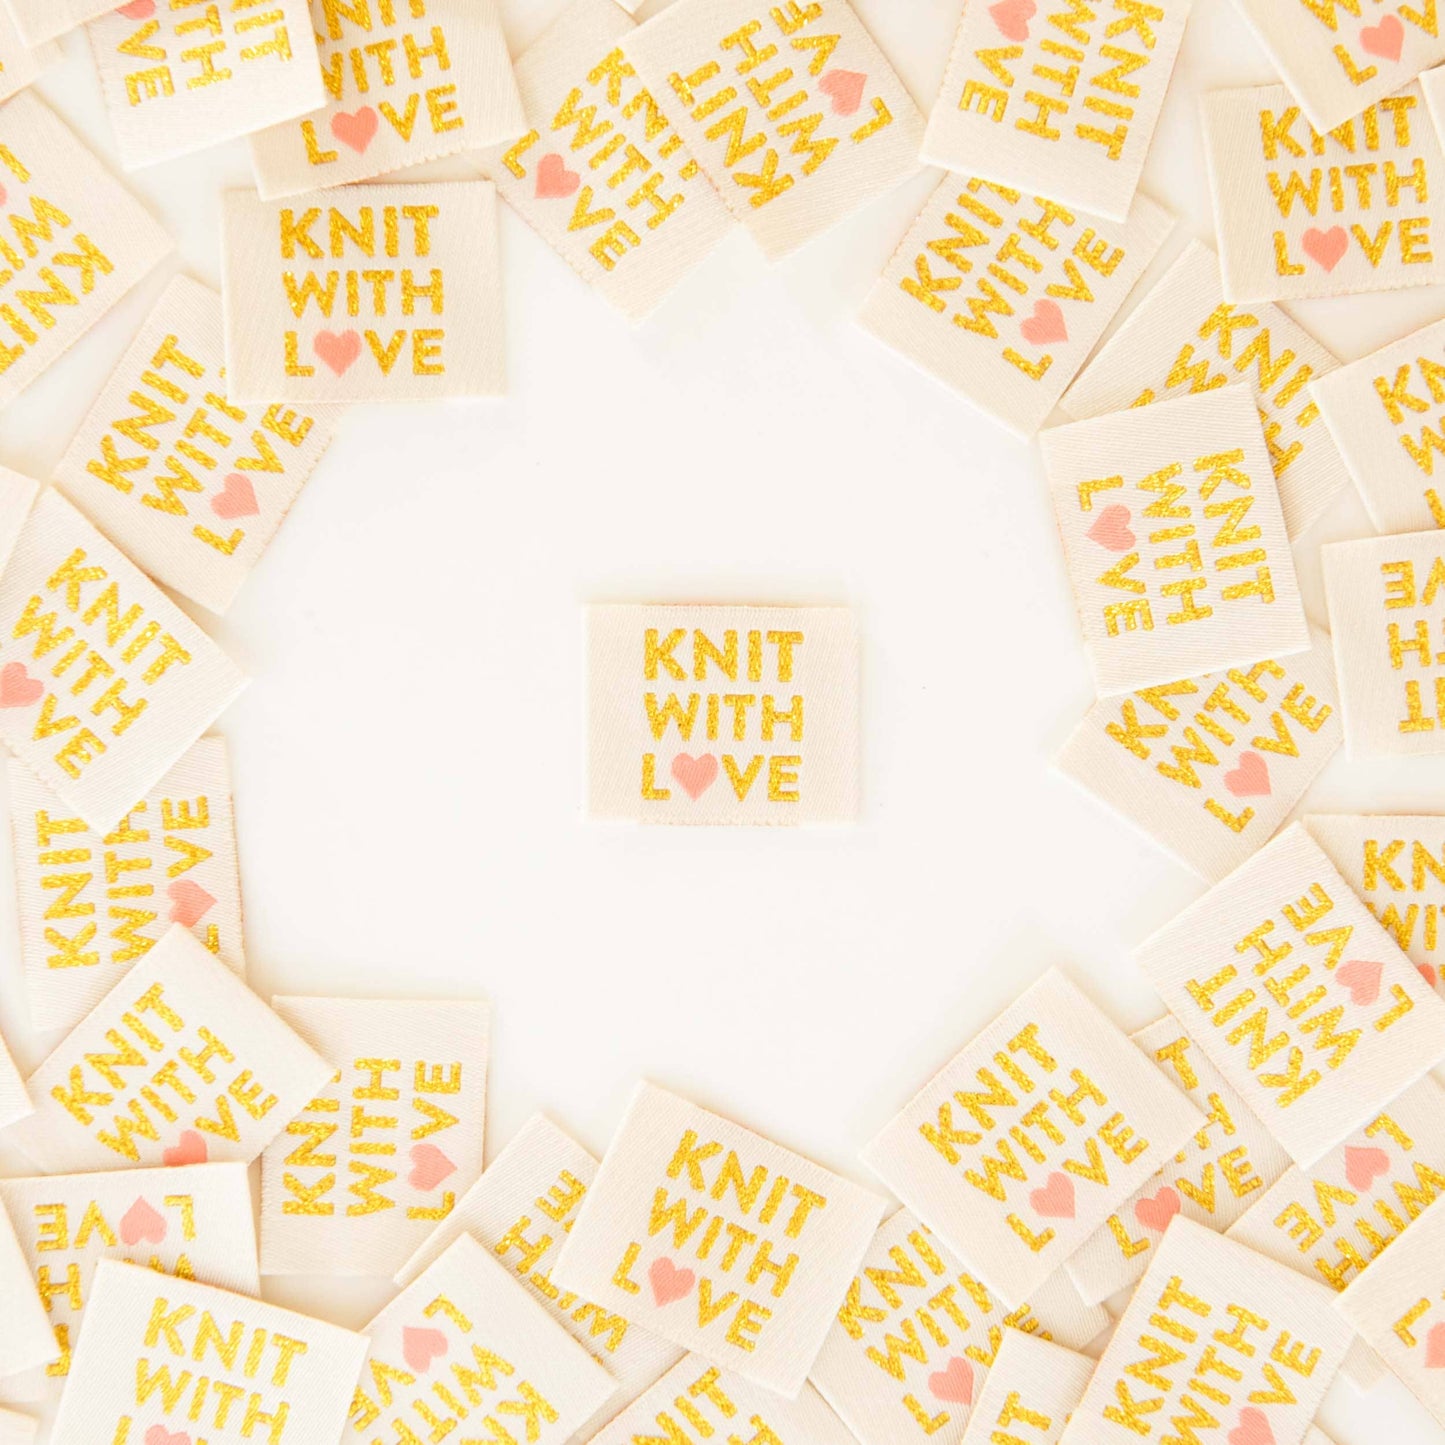 Knit with Love woven maker labels